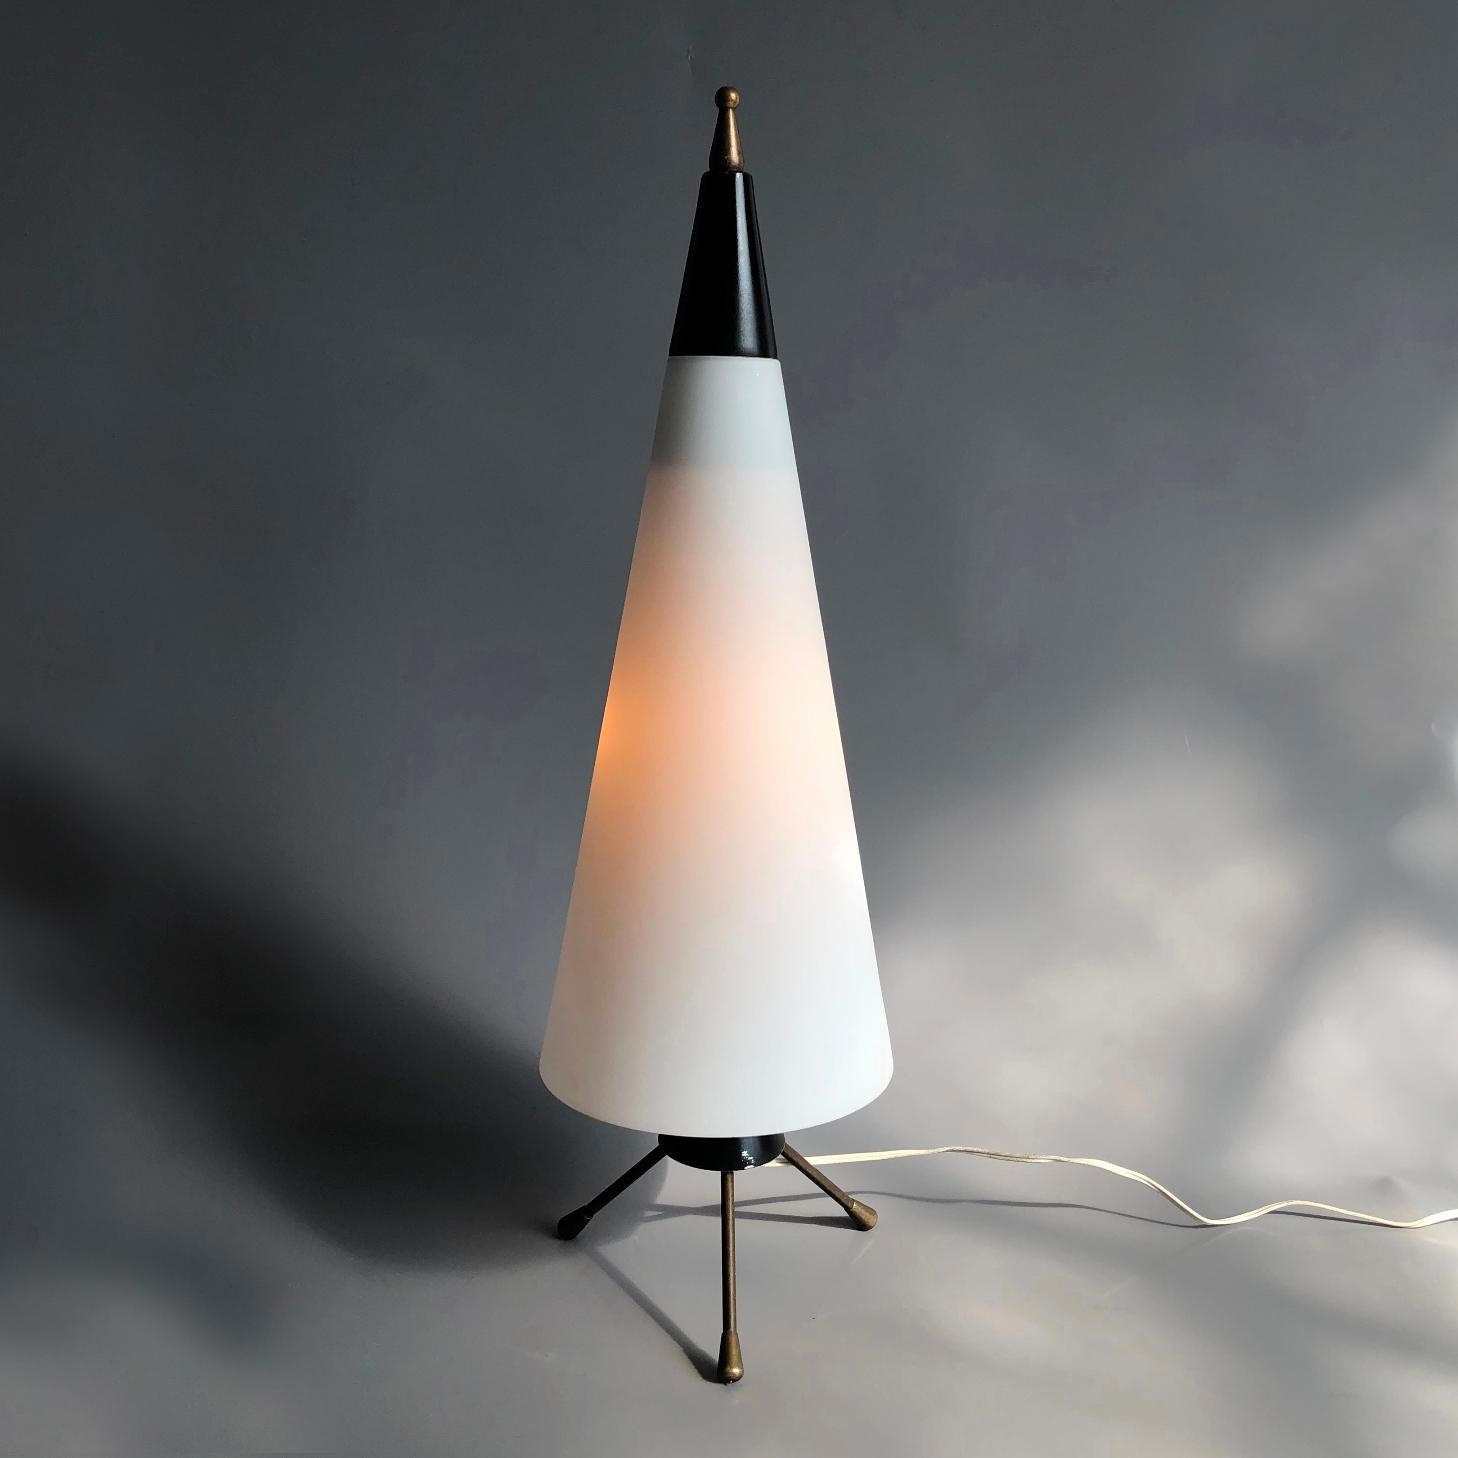 Italian Space Age Modernist Conical Table Lamp, Italy, 1960s For Sale